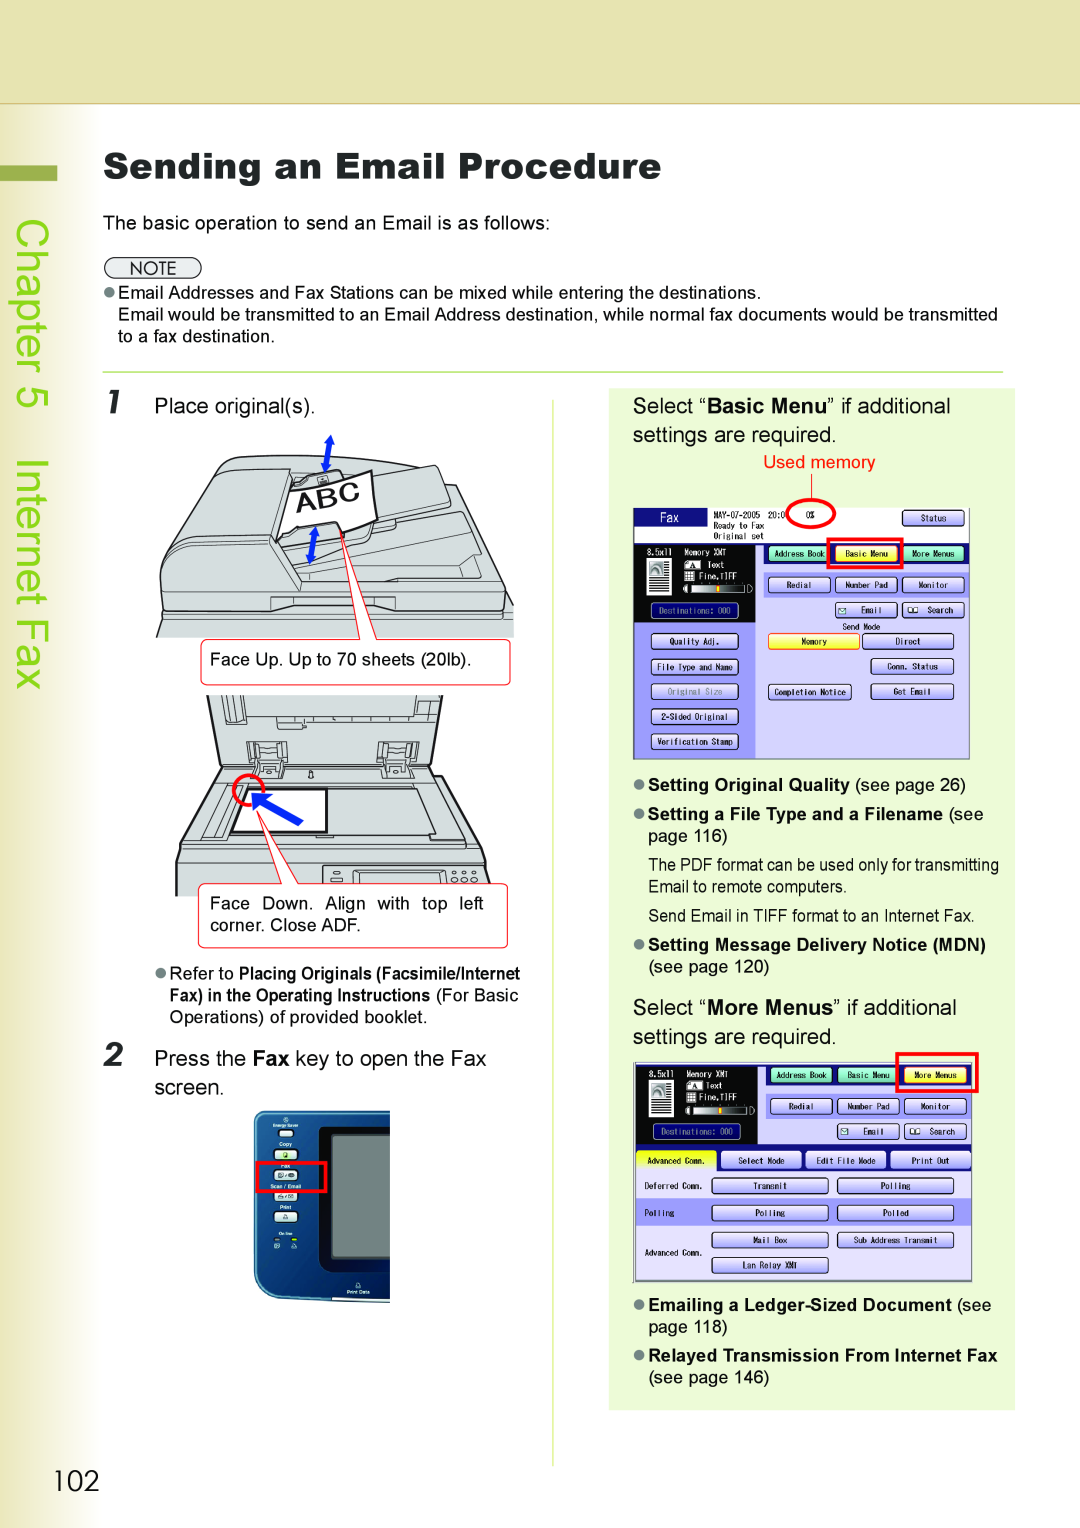 Philips DP-C262 Sending an Email Procedure, Select “More Menus” if additional, Press the Fax key to open the Fax, screen 